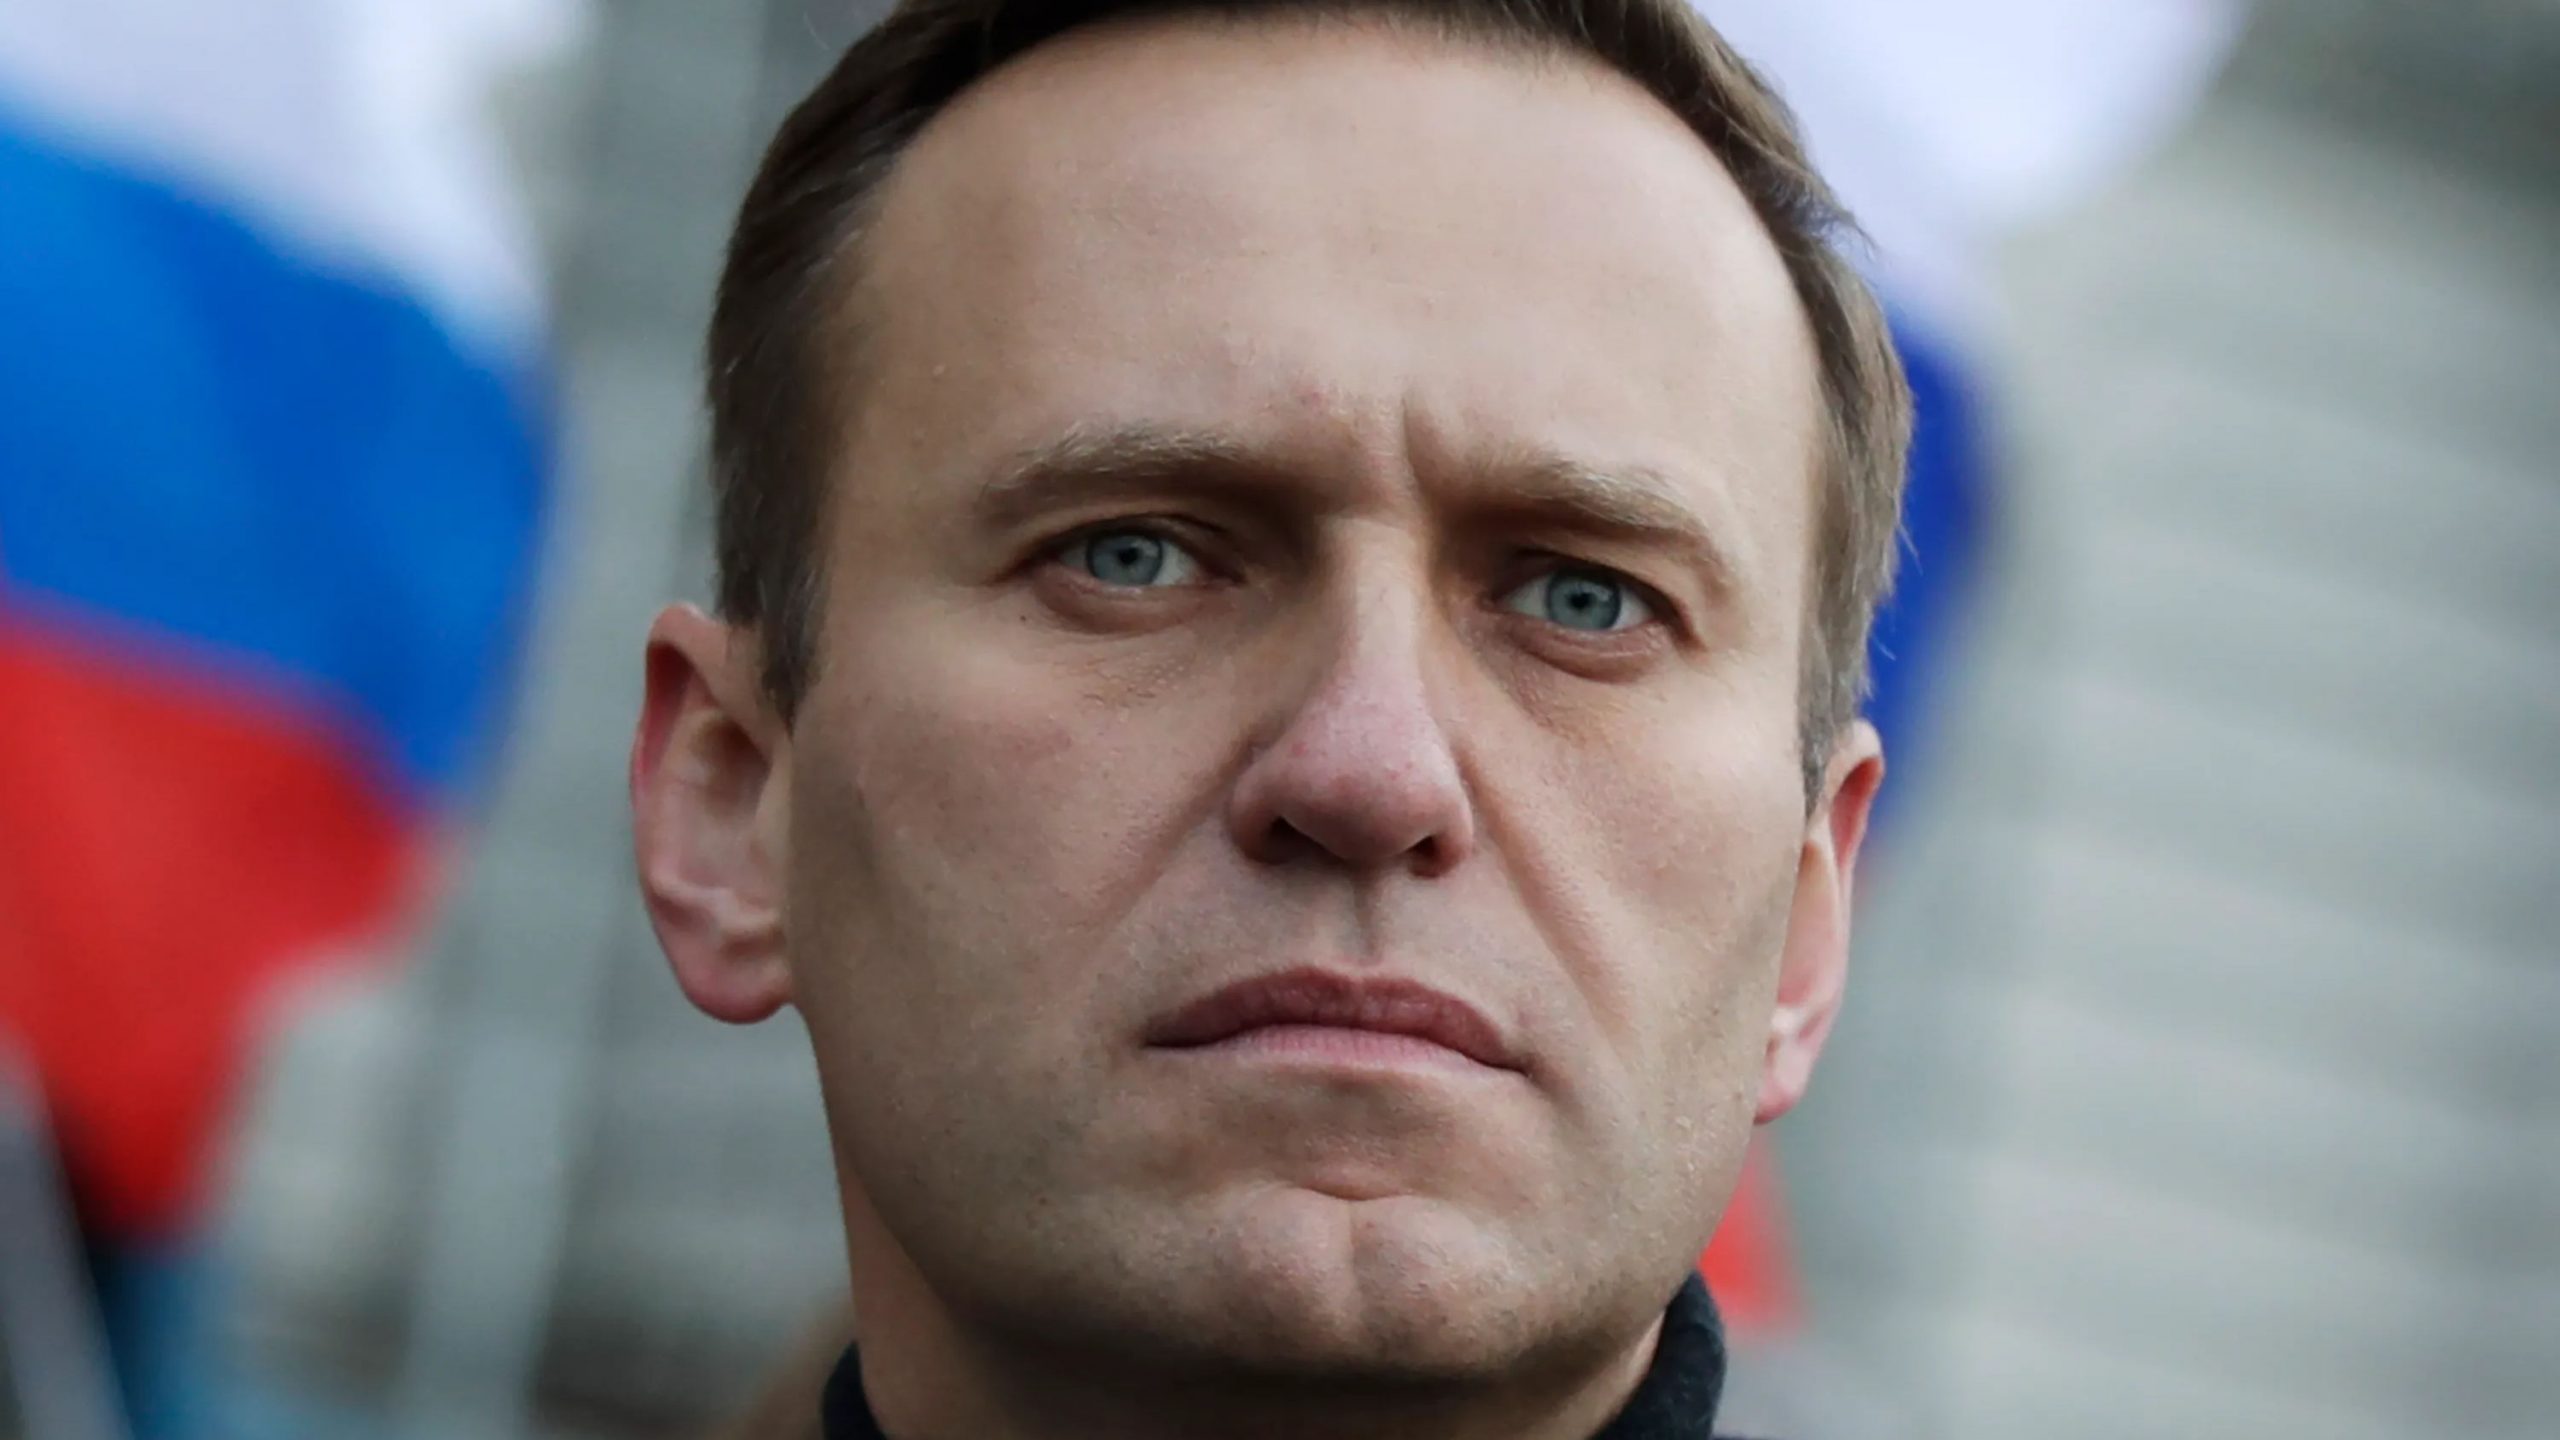 ‘Putin is behind this act,’ says Russian leader Alexei Navalny about his alleged poisoning